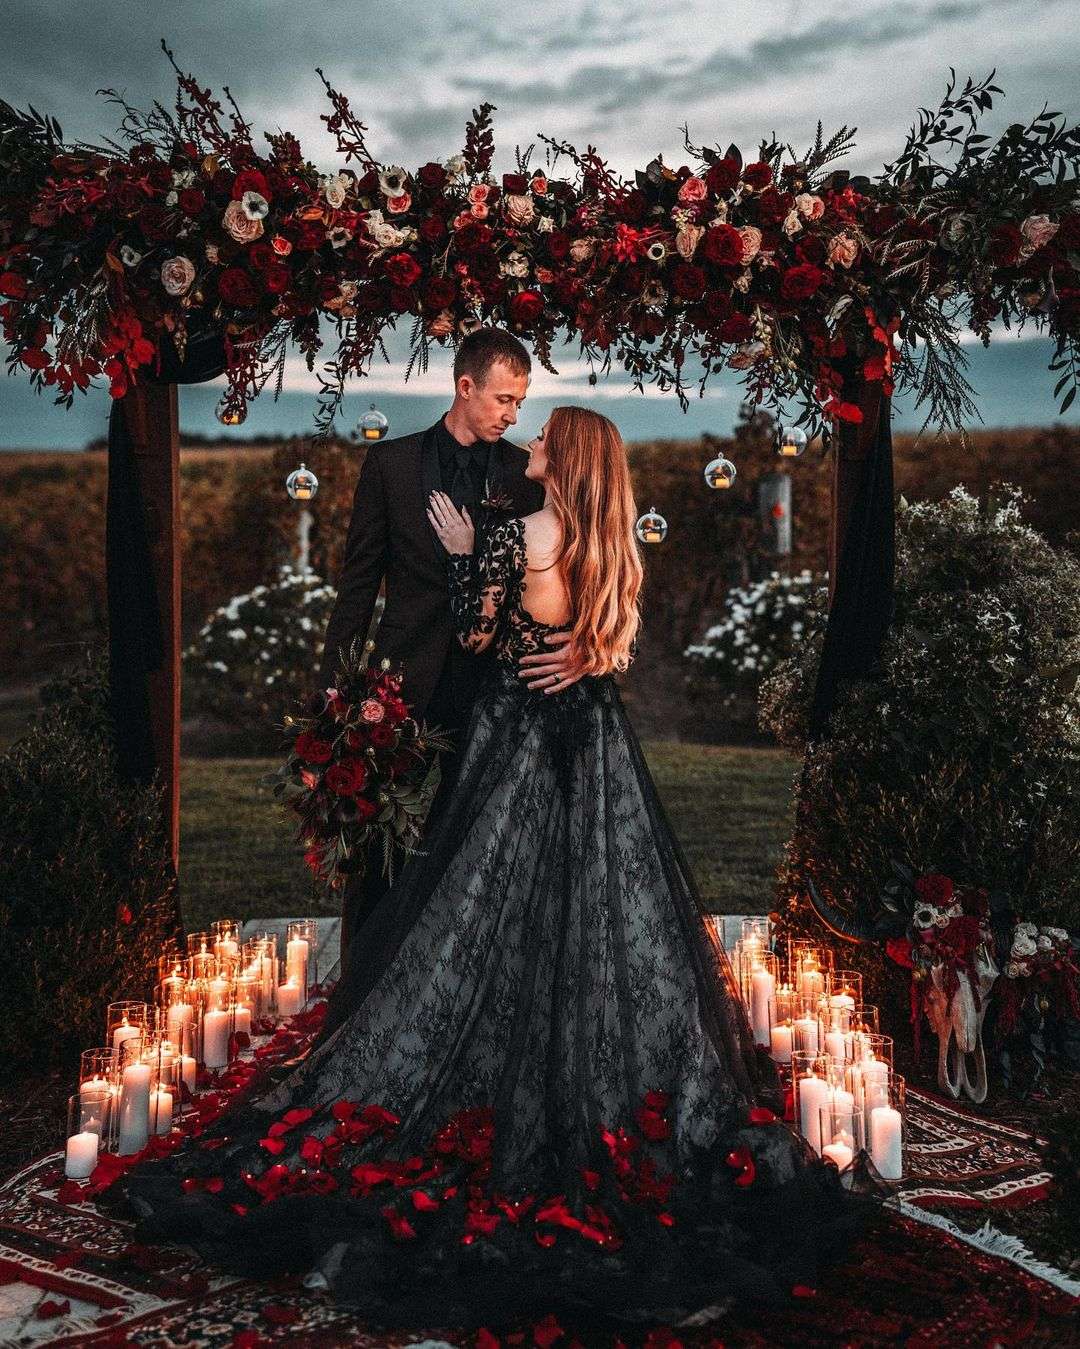 black lace wedding dress with red flower petals